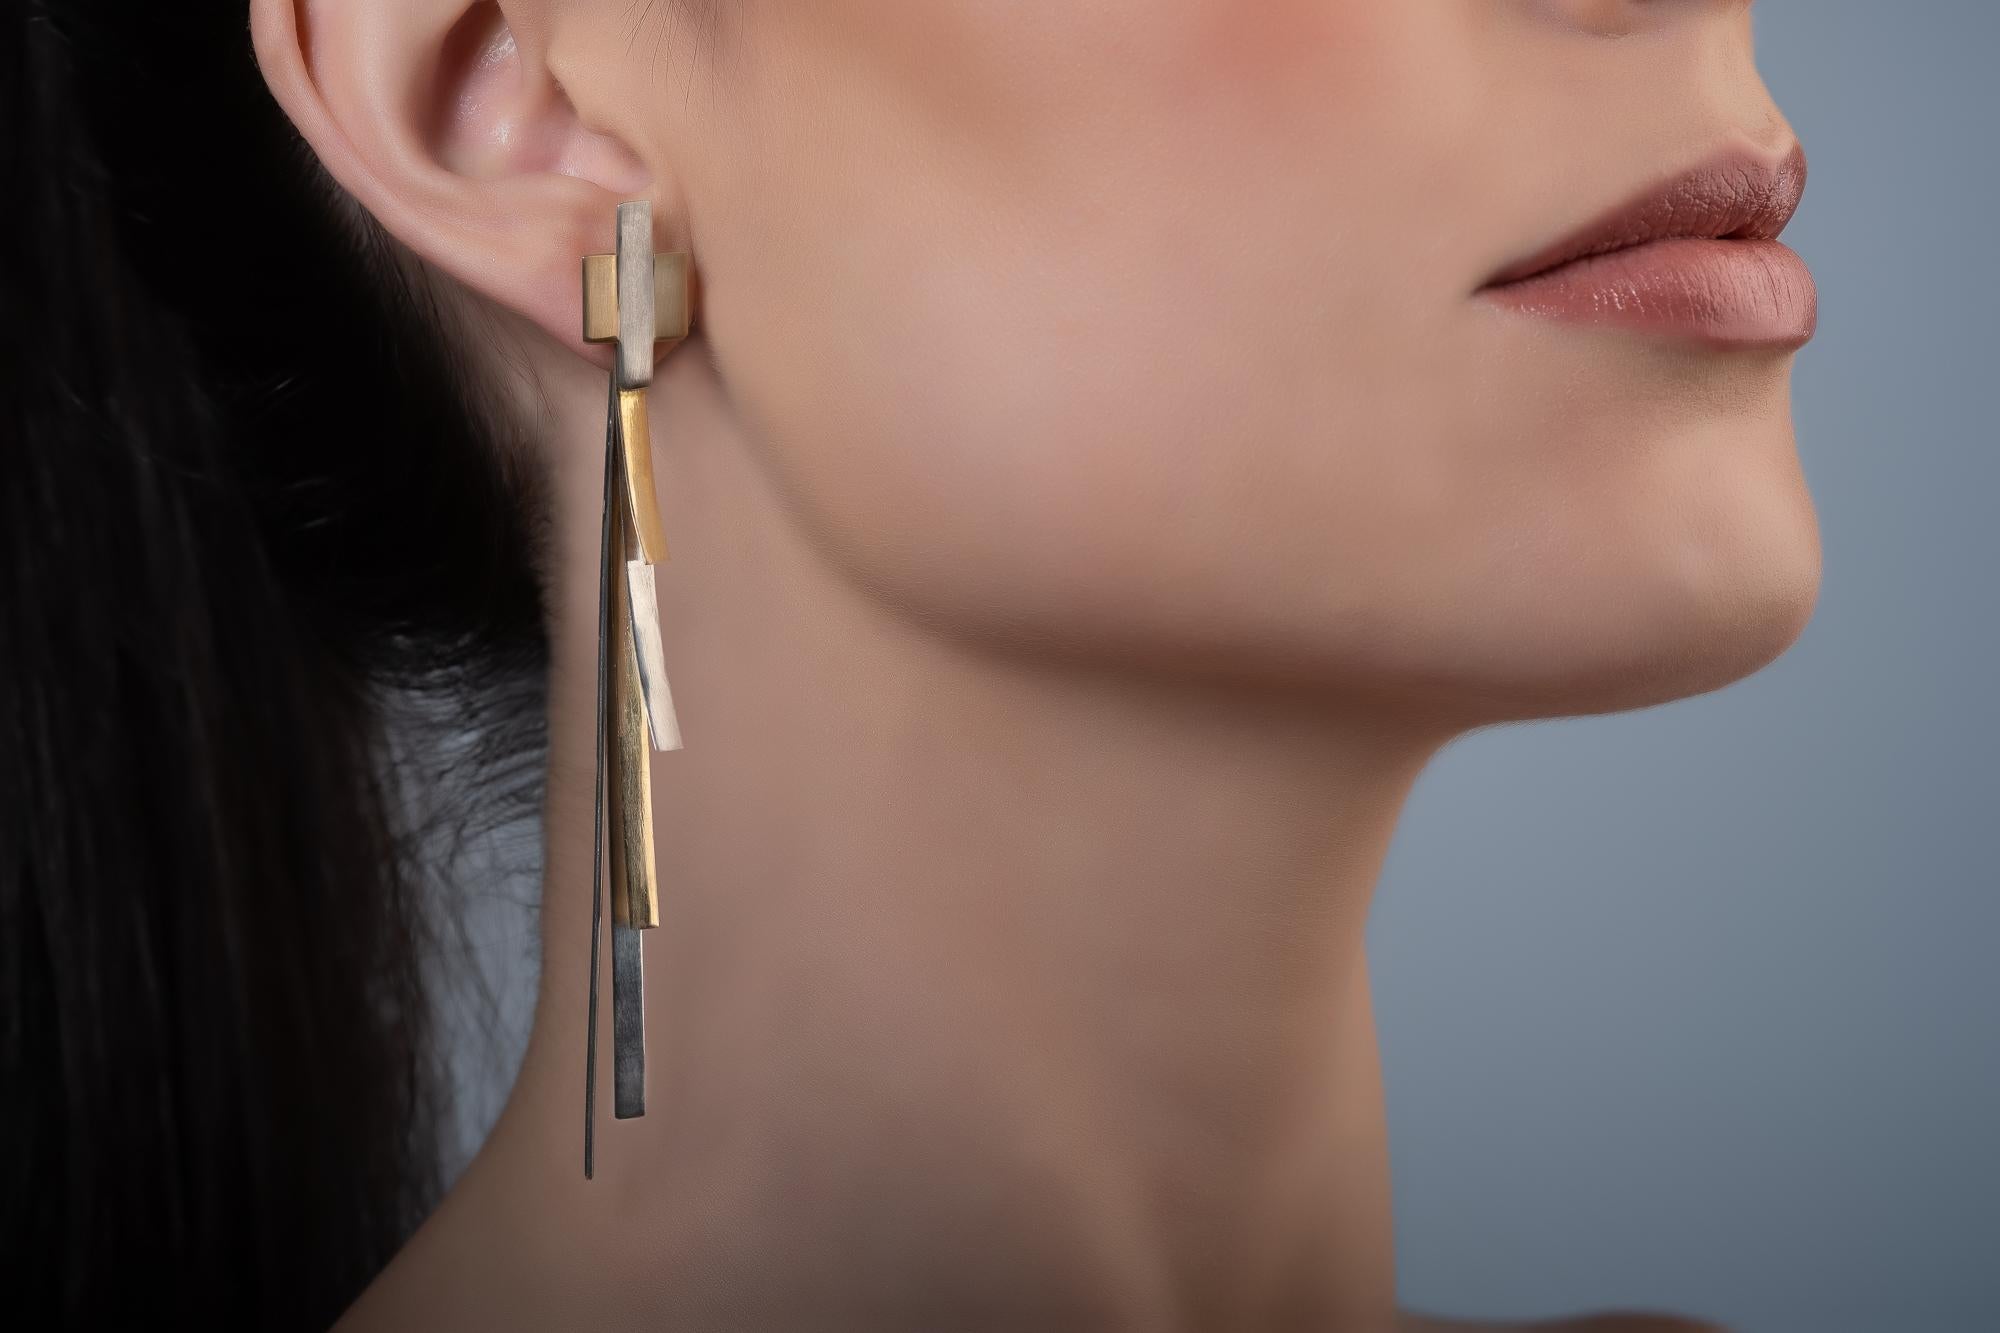 The first pair of long earrings from the Linhas collection was the result of a project at the Centro de Joalharia de Lisboa in 2017 during the Author Jewellery studies, by author Marlise Haut. After the start of the company's activities, Missian